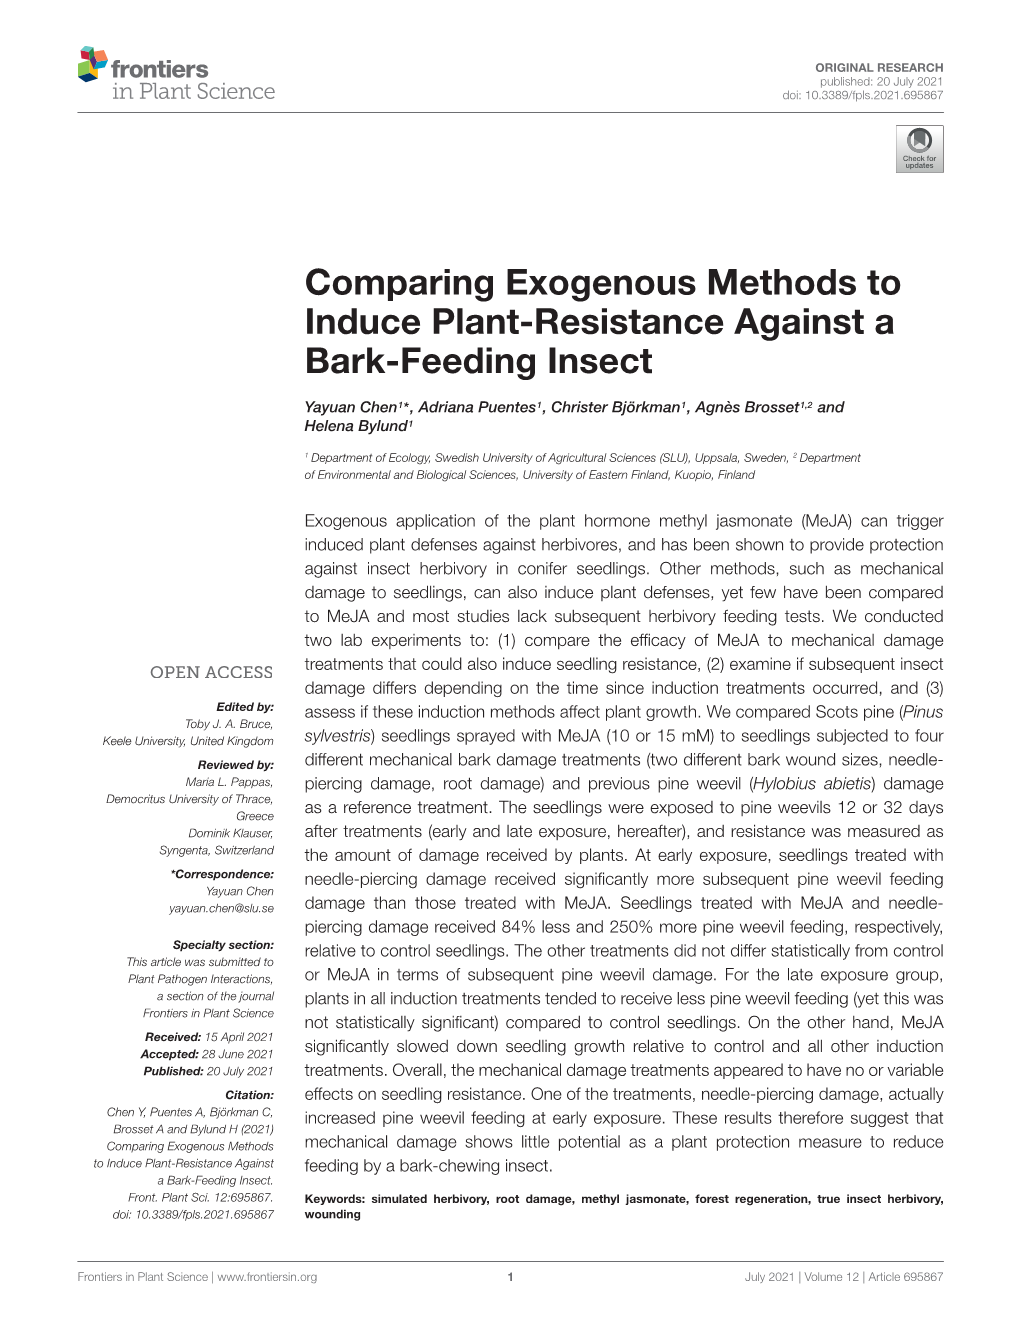 Comparing Exogenous Methods to Induce Plant-Resistance Against a Bark-Feeding Insect